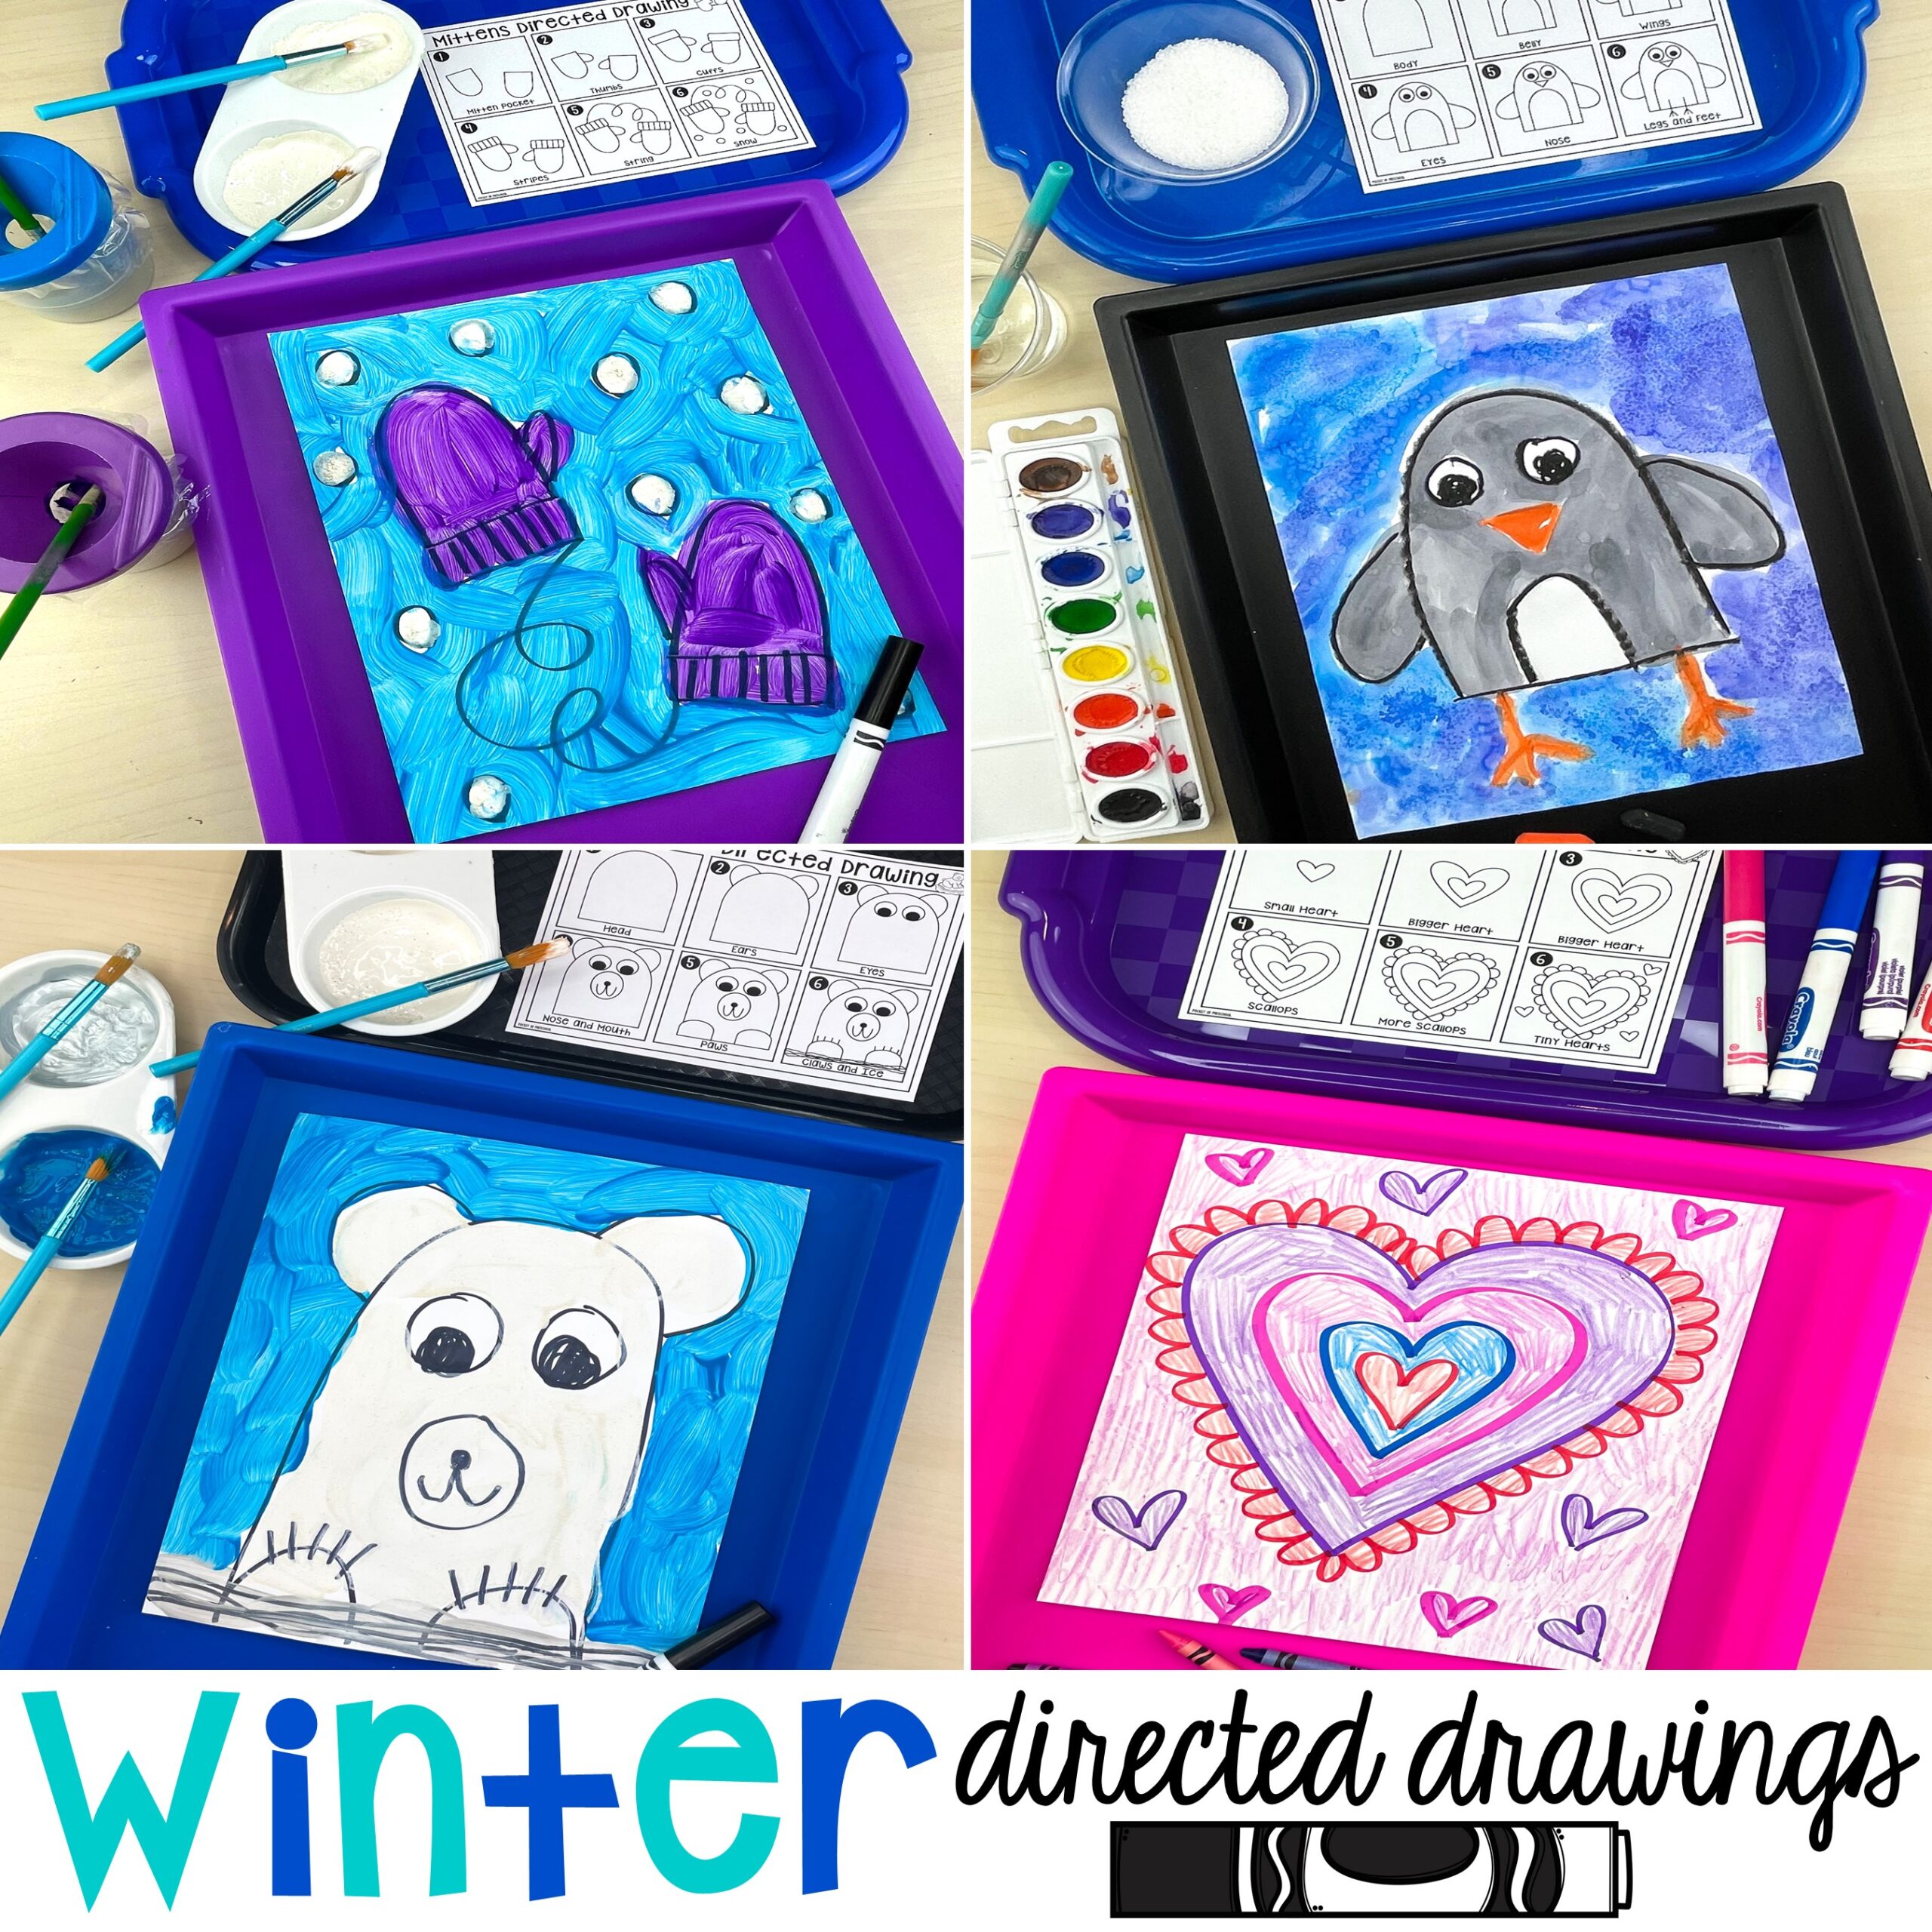 All about winter directed drawings and how to use them in your preschool, pre-k, and kindergarten classroom.